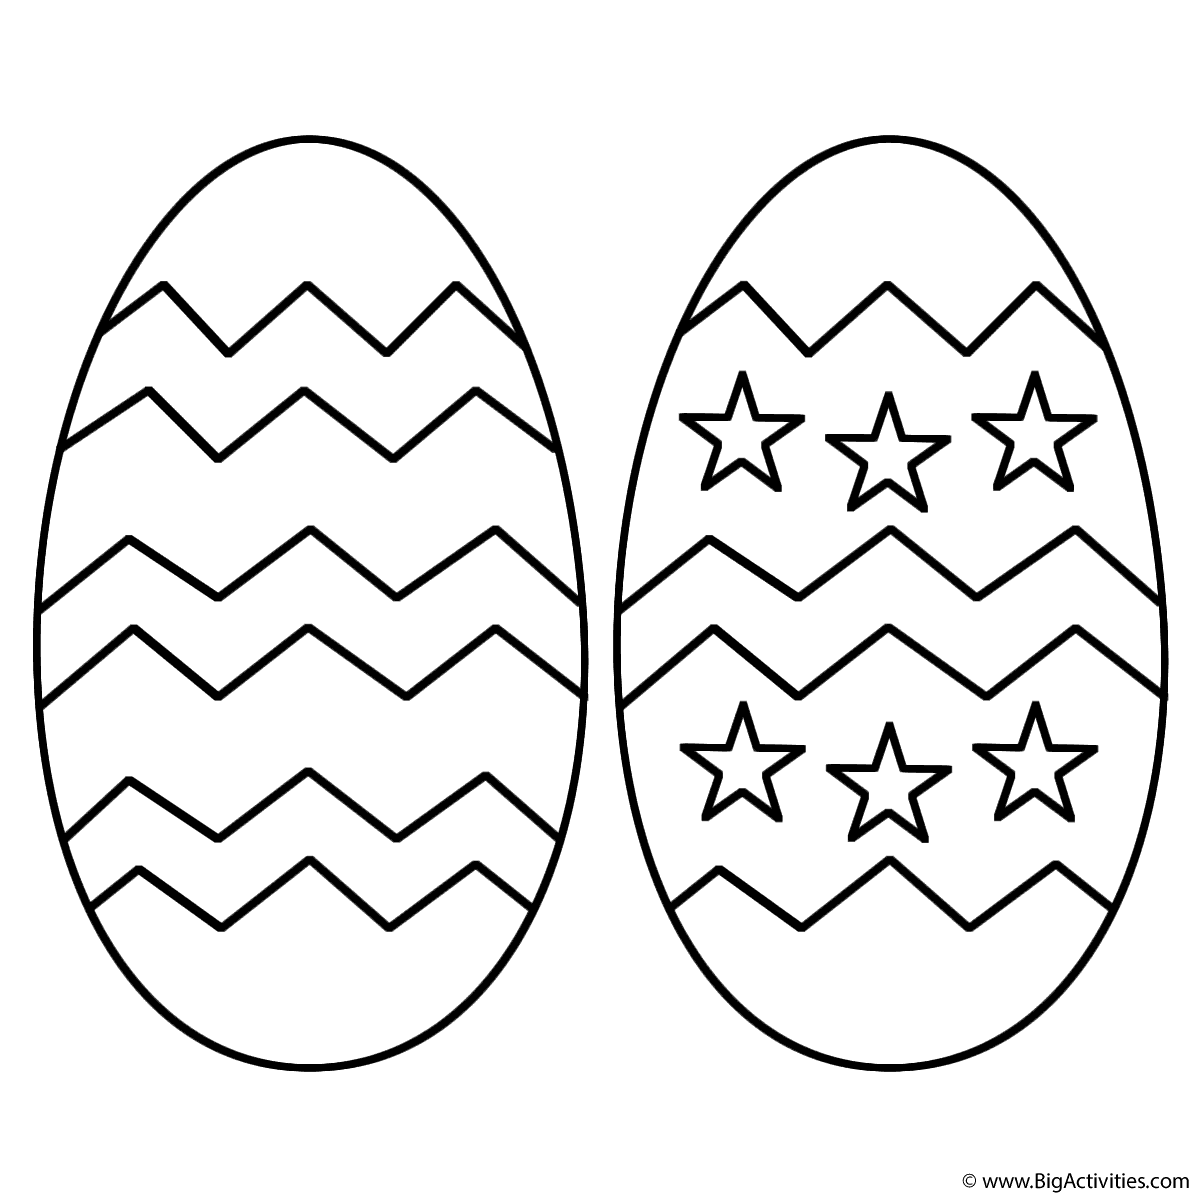 Two Easter Eggs with patterns - Coloring Page (Easter)